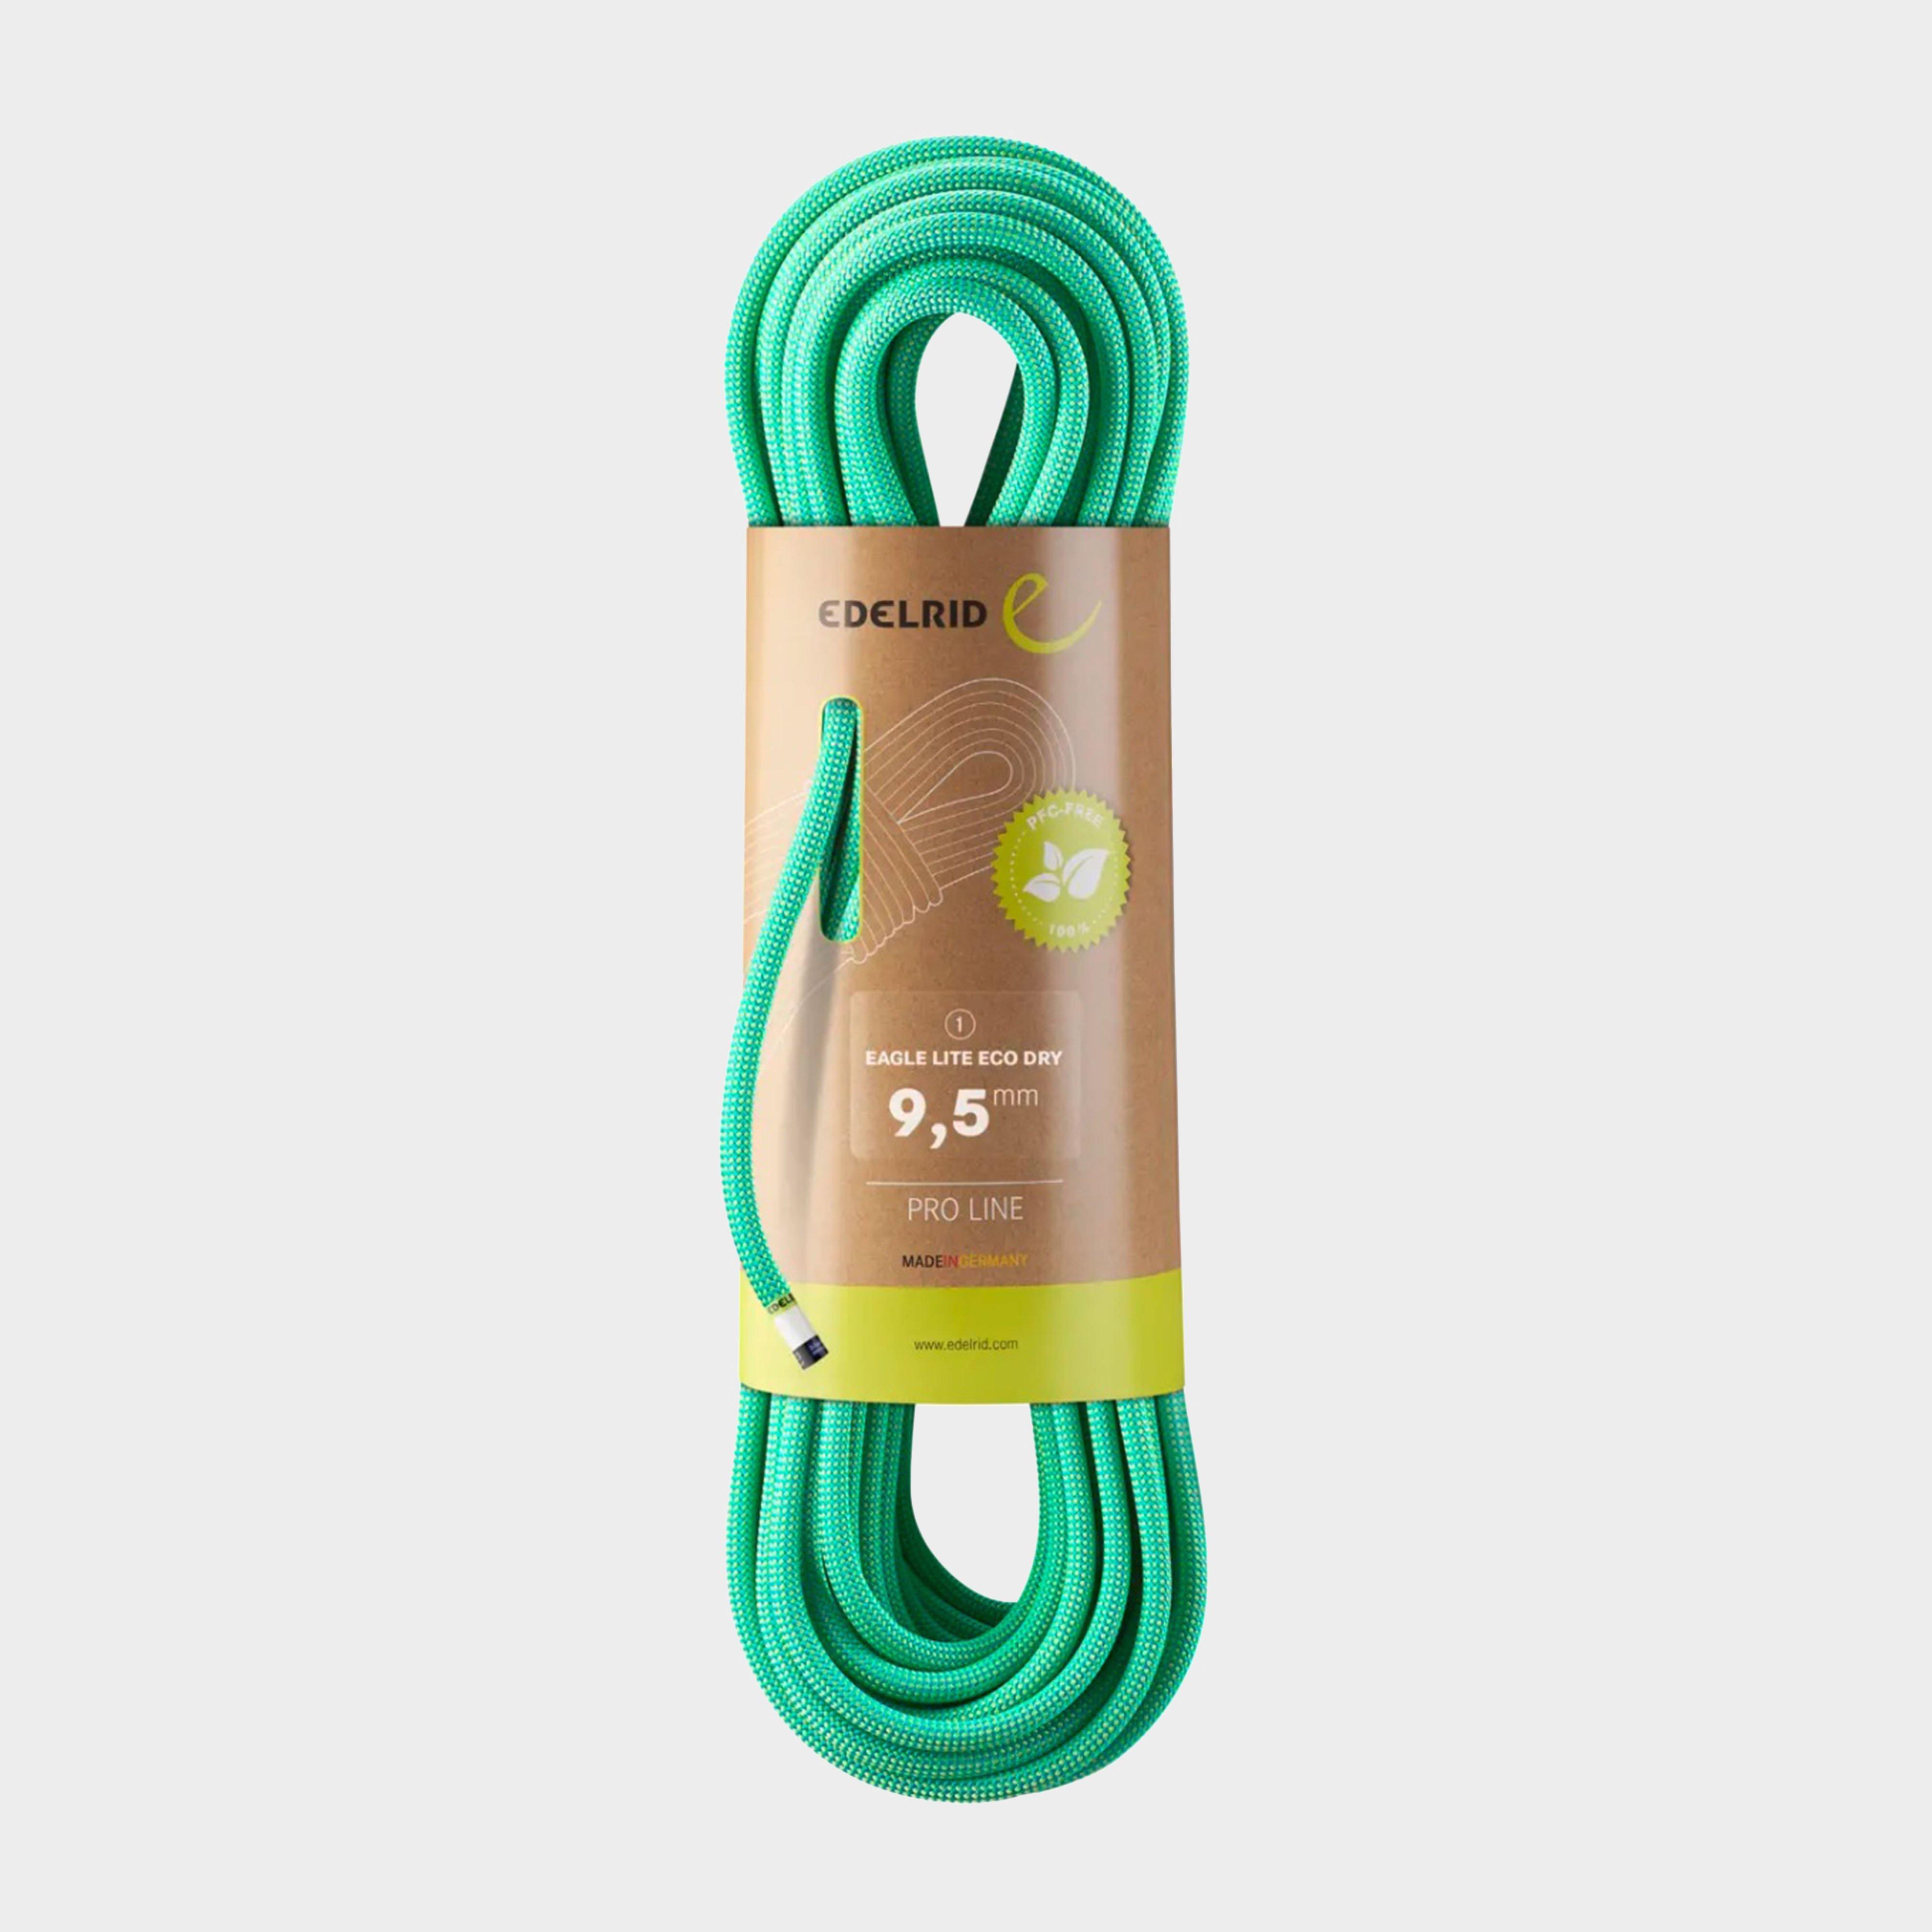 Edelrid Edelrid Eagle Lite Eco Dry 9.5Mm Climbing Rope - Green, Green